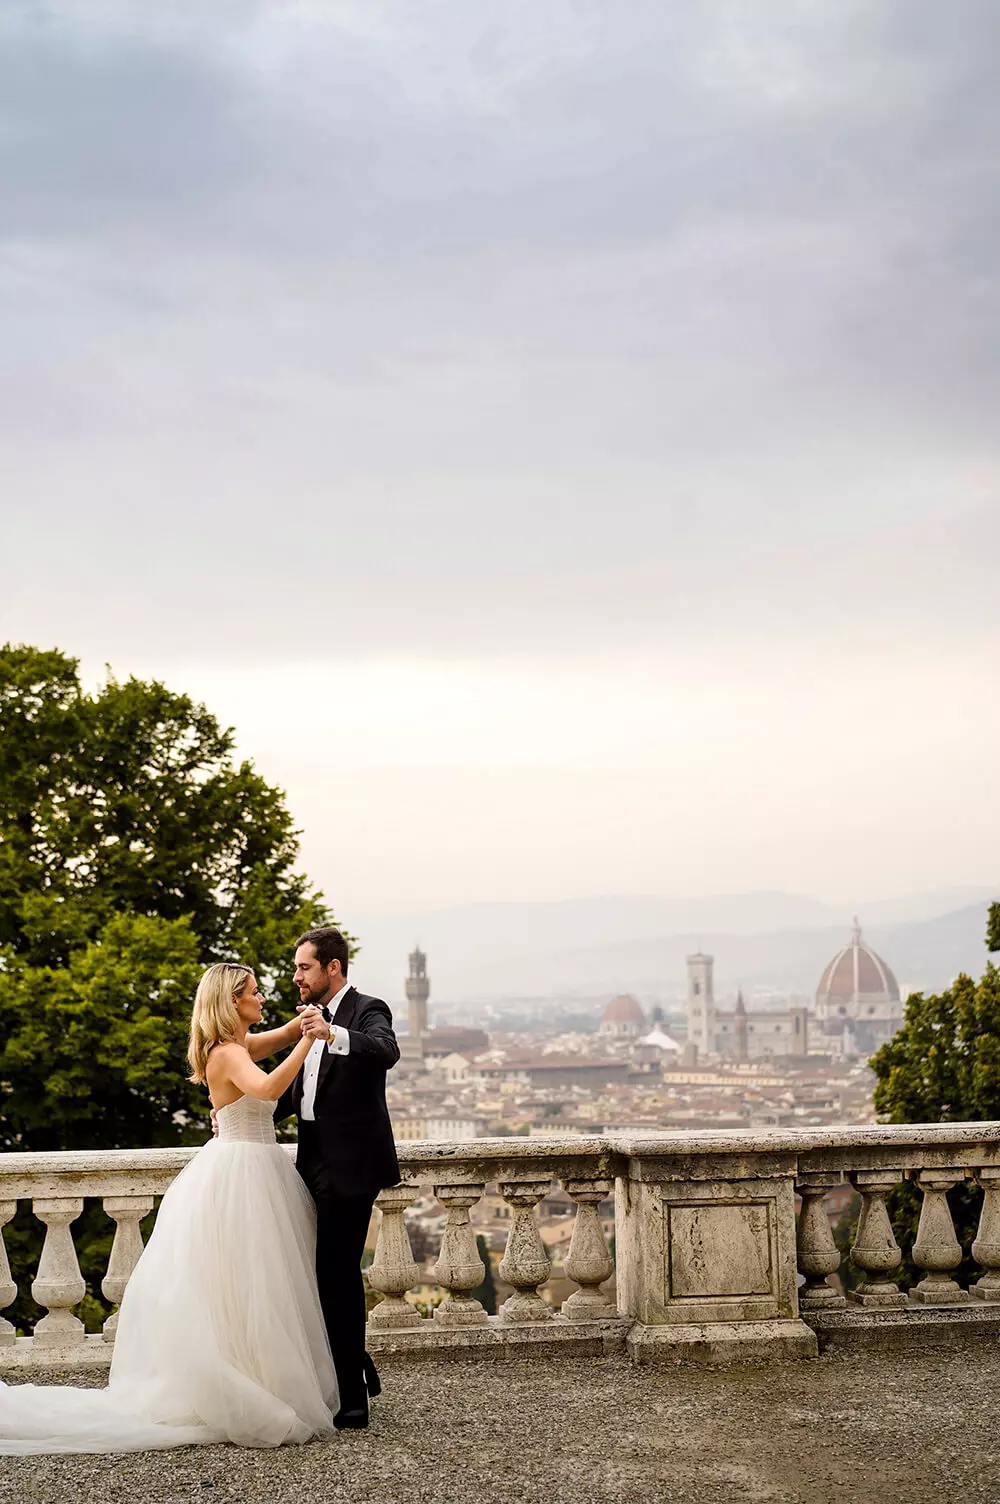 The Stylish Bride client wedding day in Italy